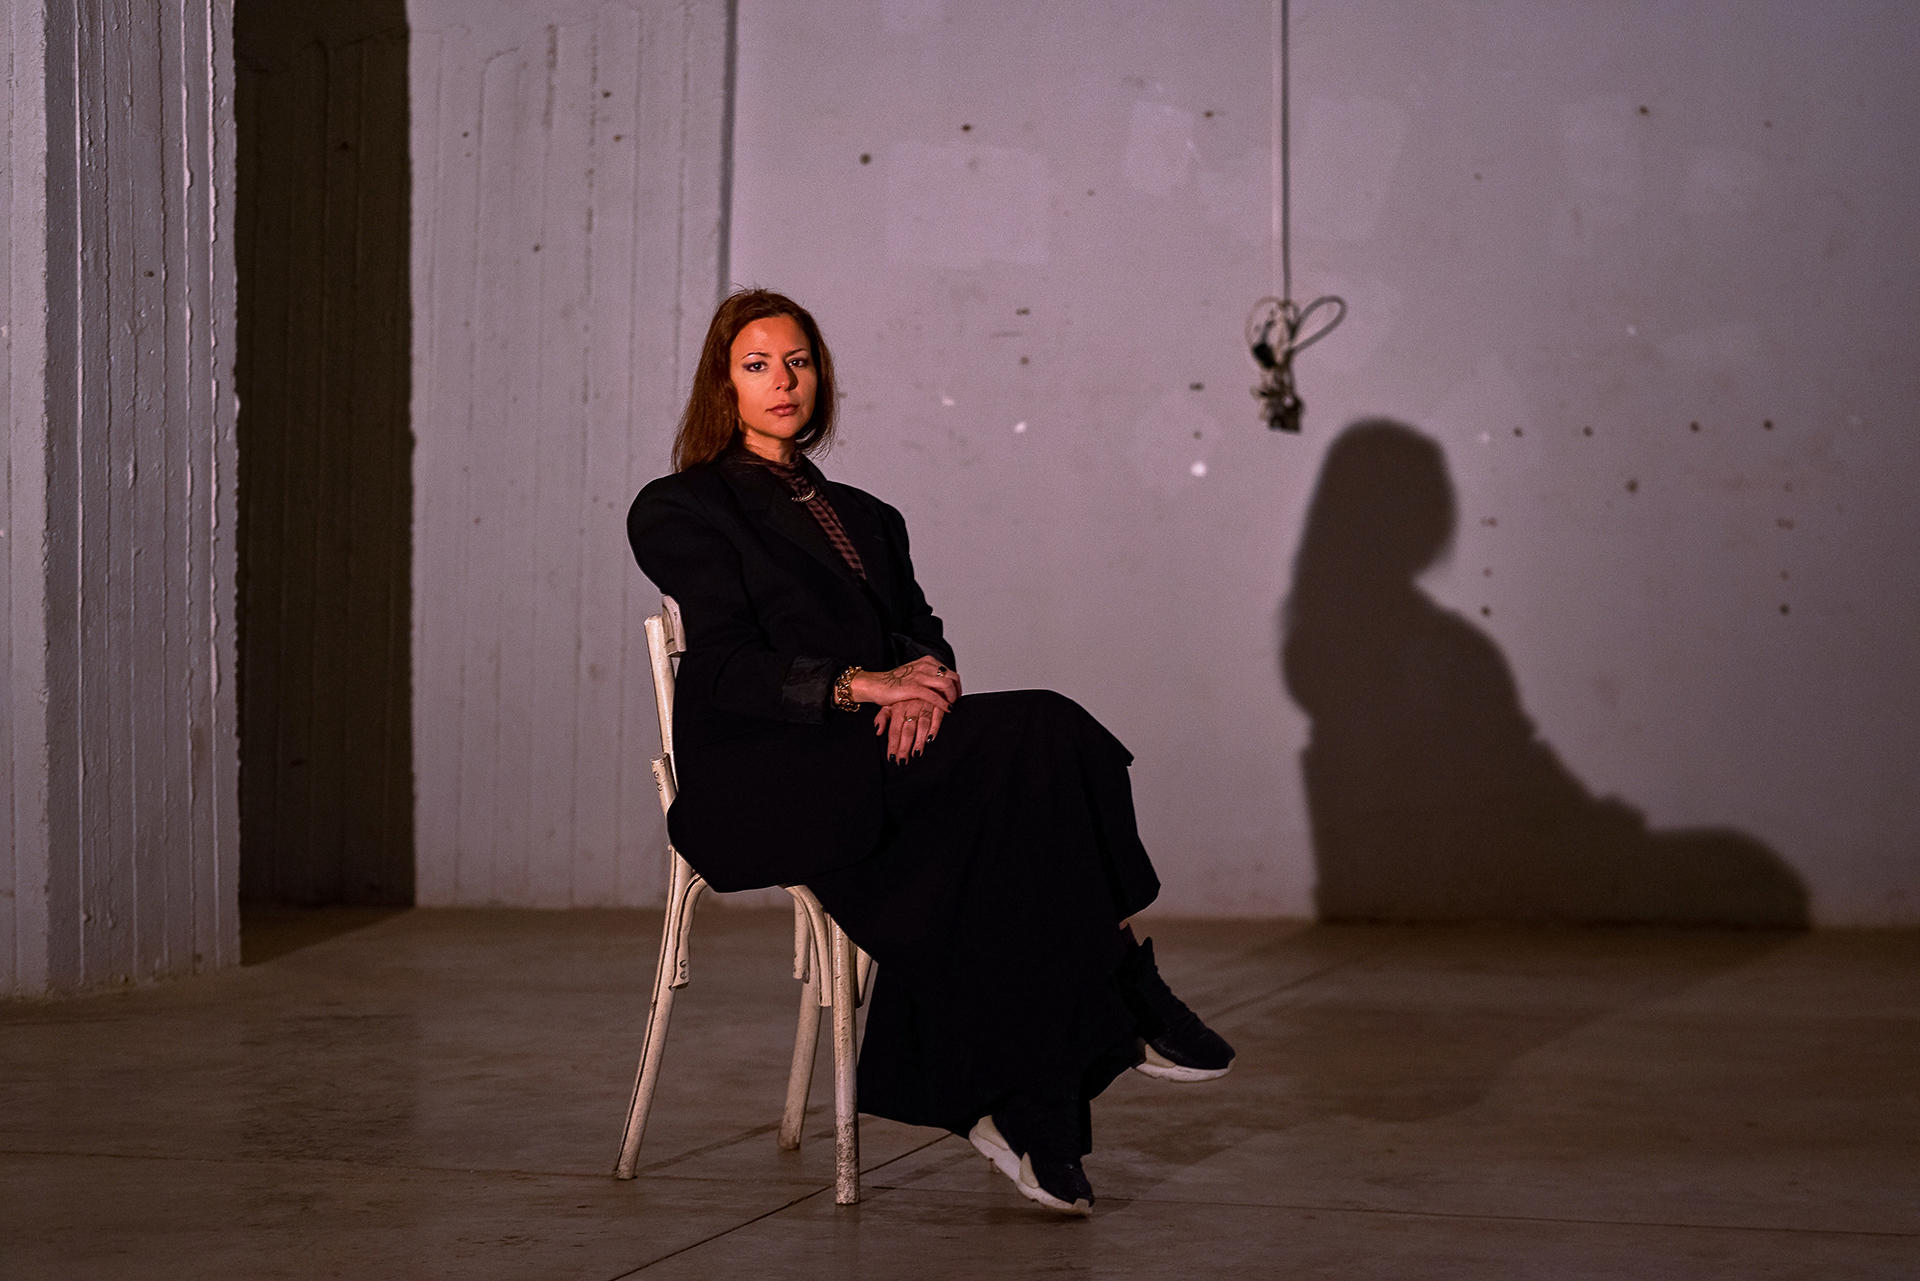 Portrait of Liliane Chlela seated in an industrial space